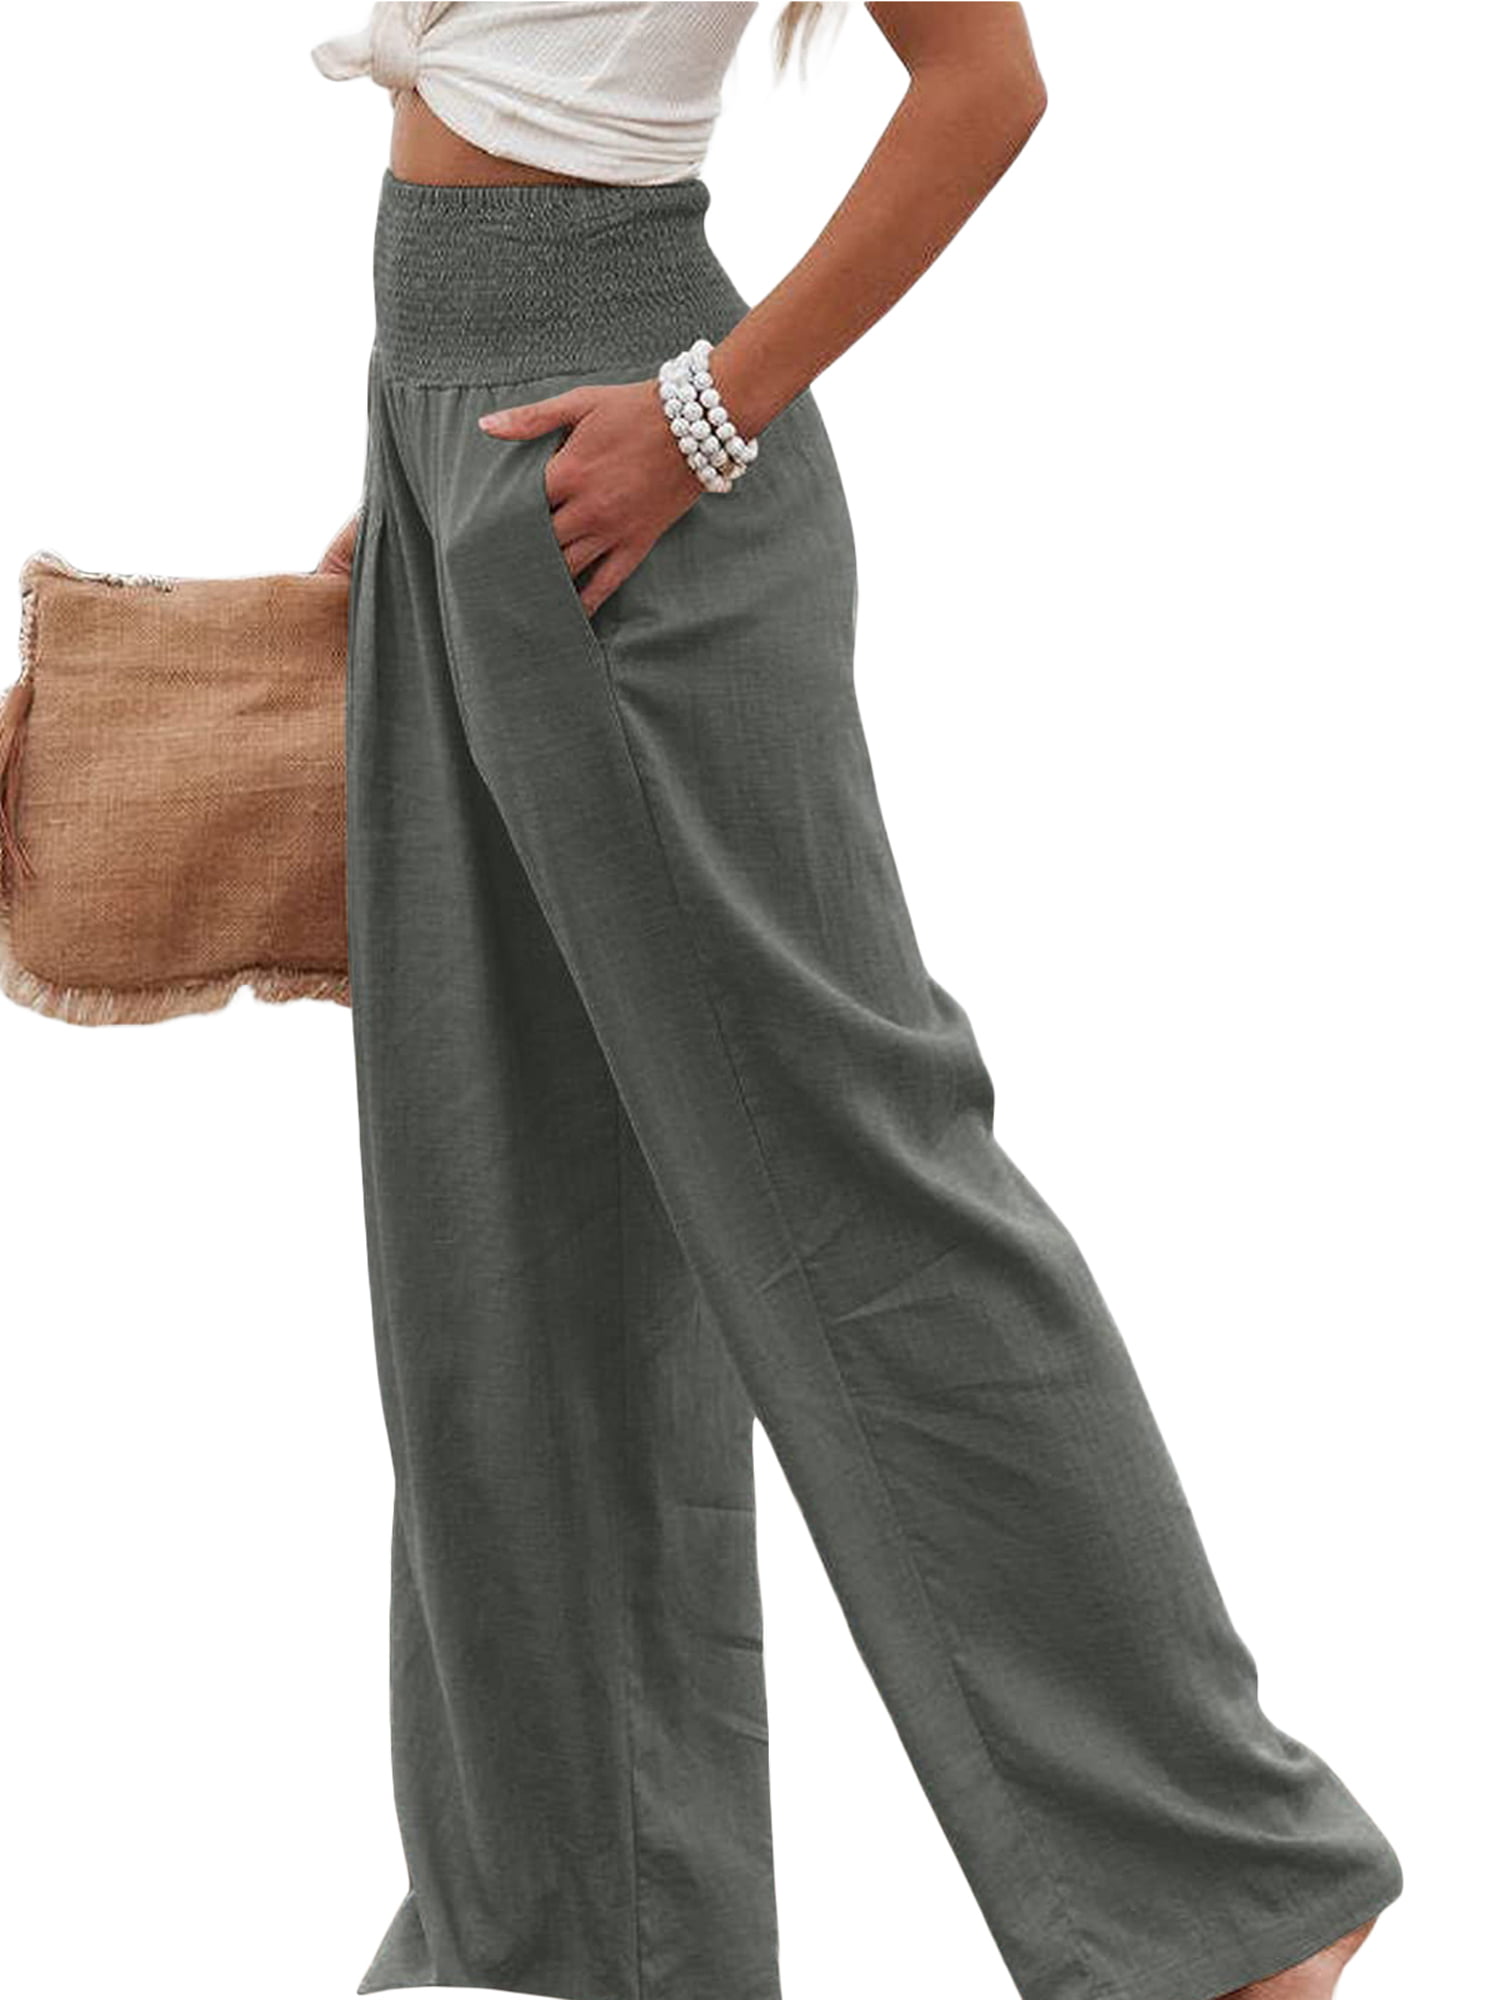  GLIENST Women's Cotton Linen Pants Elastic High Waist Wide Leg  Palazzo Lounge Smocked Casual Trousers with Pocketed One Piece Bottom Grey  XL : Clothing, Shoes & Jewelry